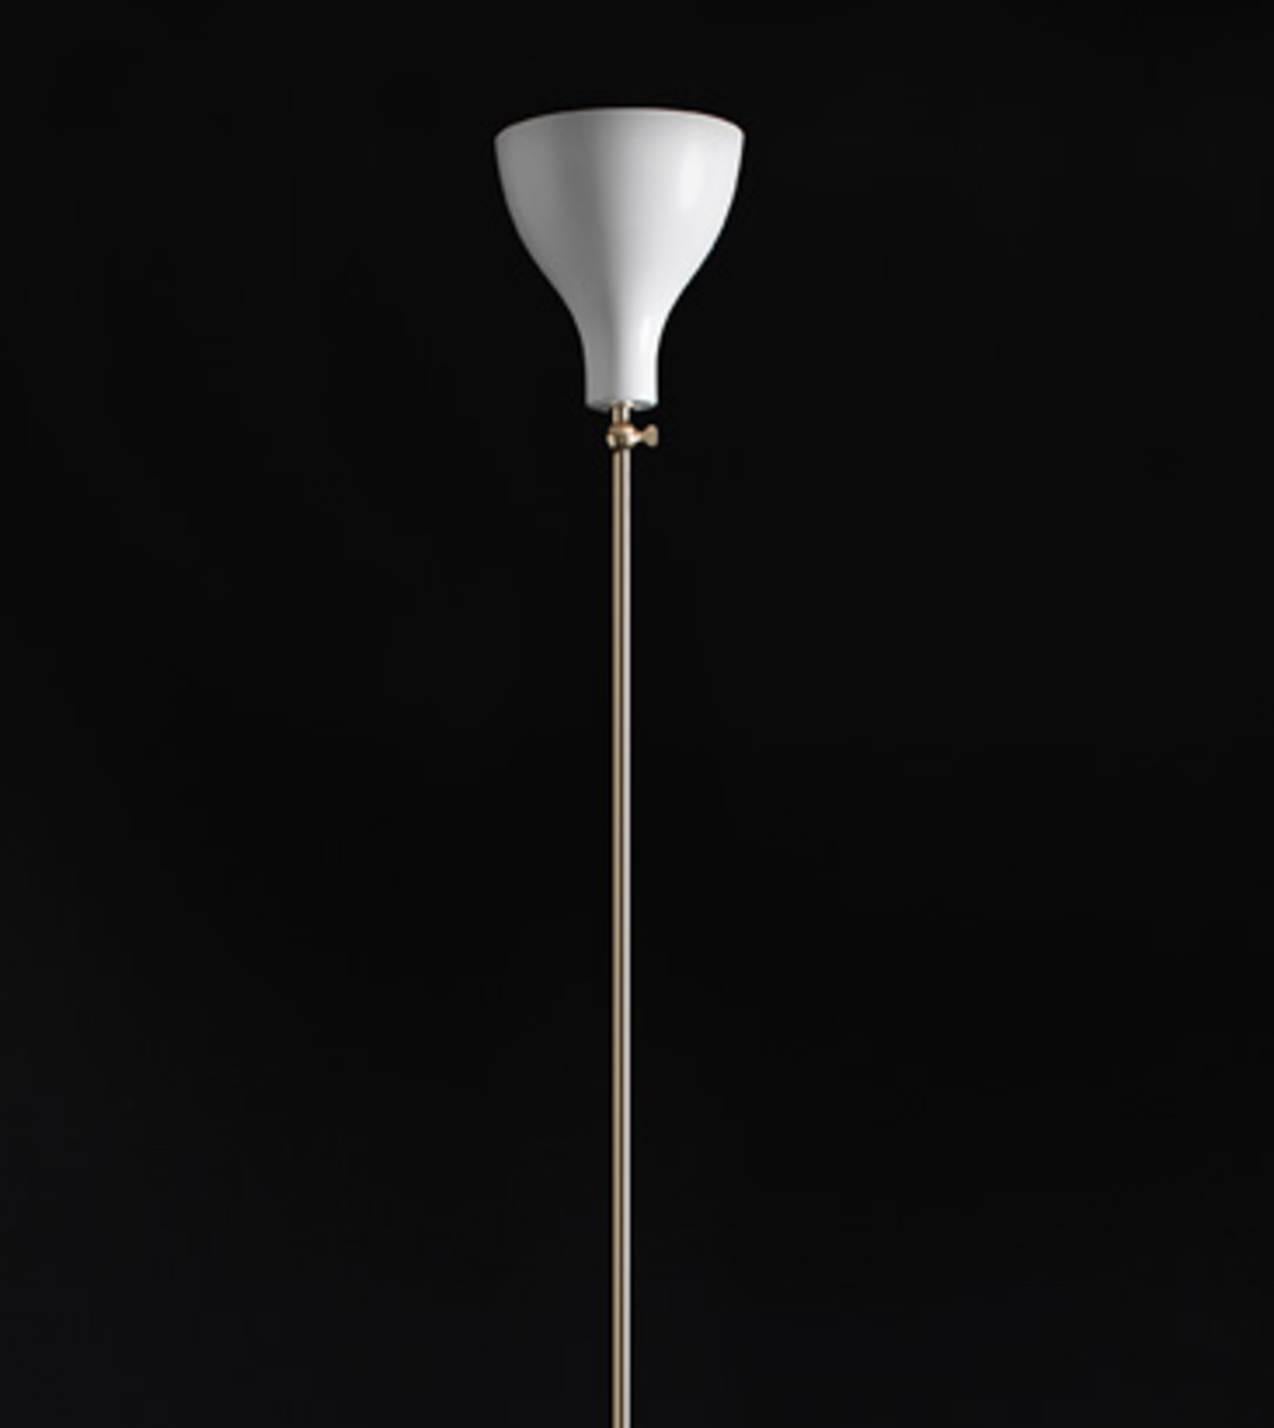 Brass or chrome floor lamp with white or black shade.
Shade can be moved/redirected by twisting a lever. Indirect light. 

One x HSGS max 100W E27
220/240
Class II / IP 20
CE Certificate.
Can be wired to UL standard, without UL certification. 